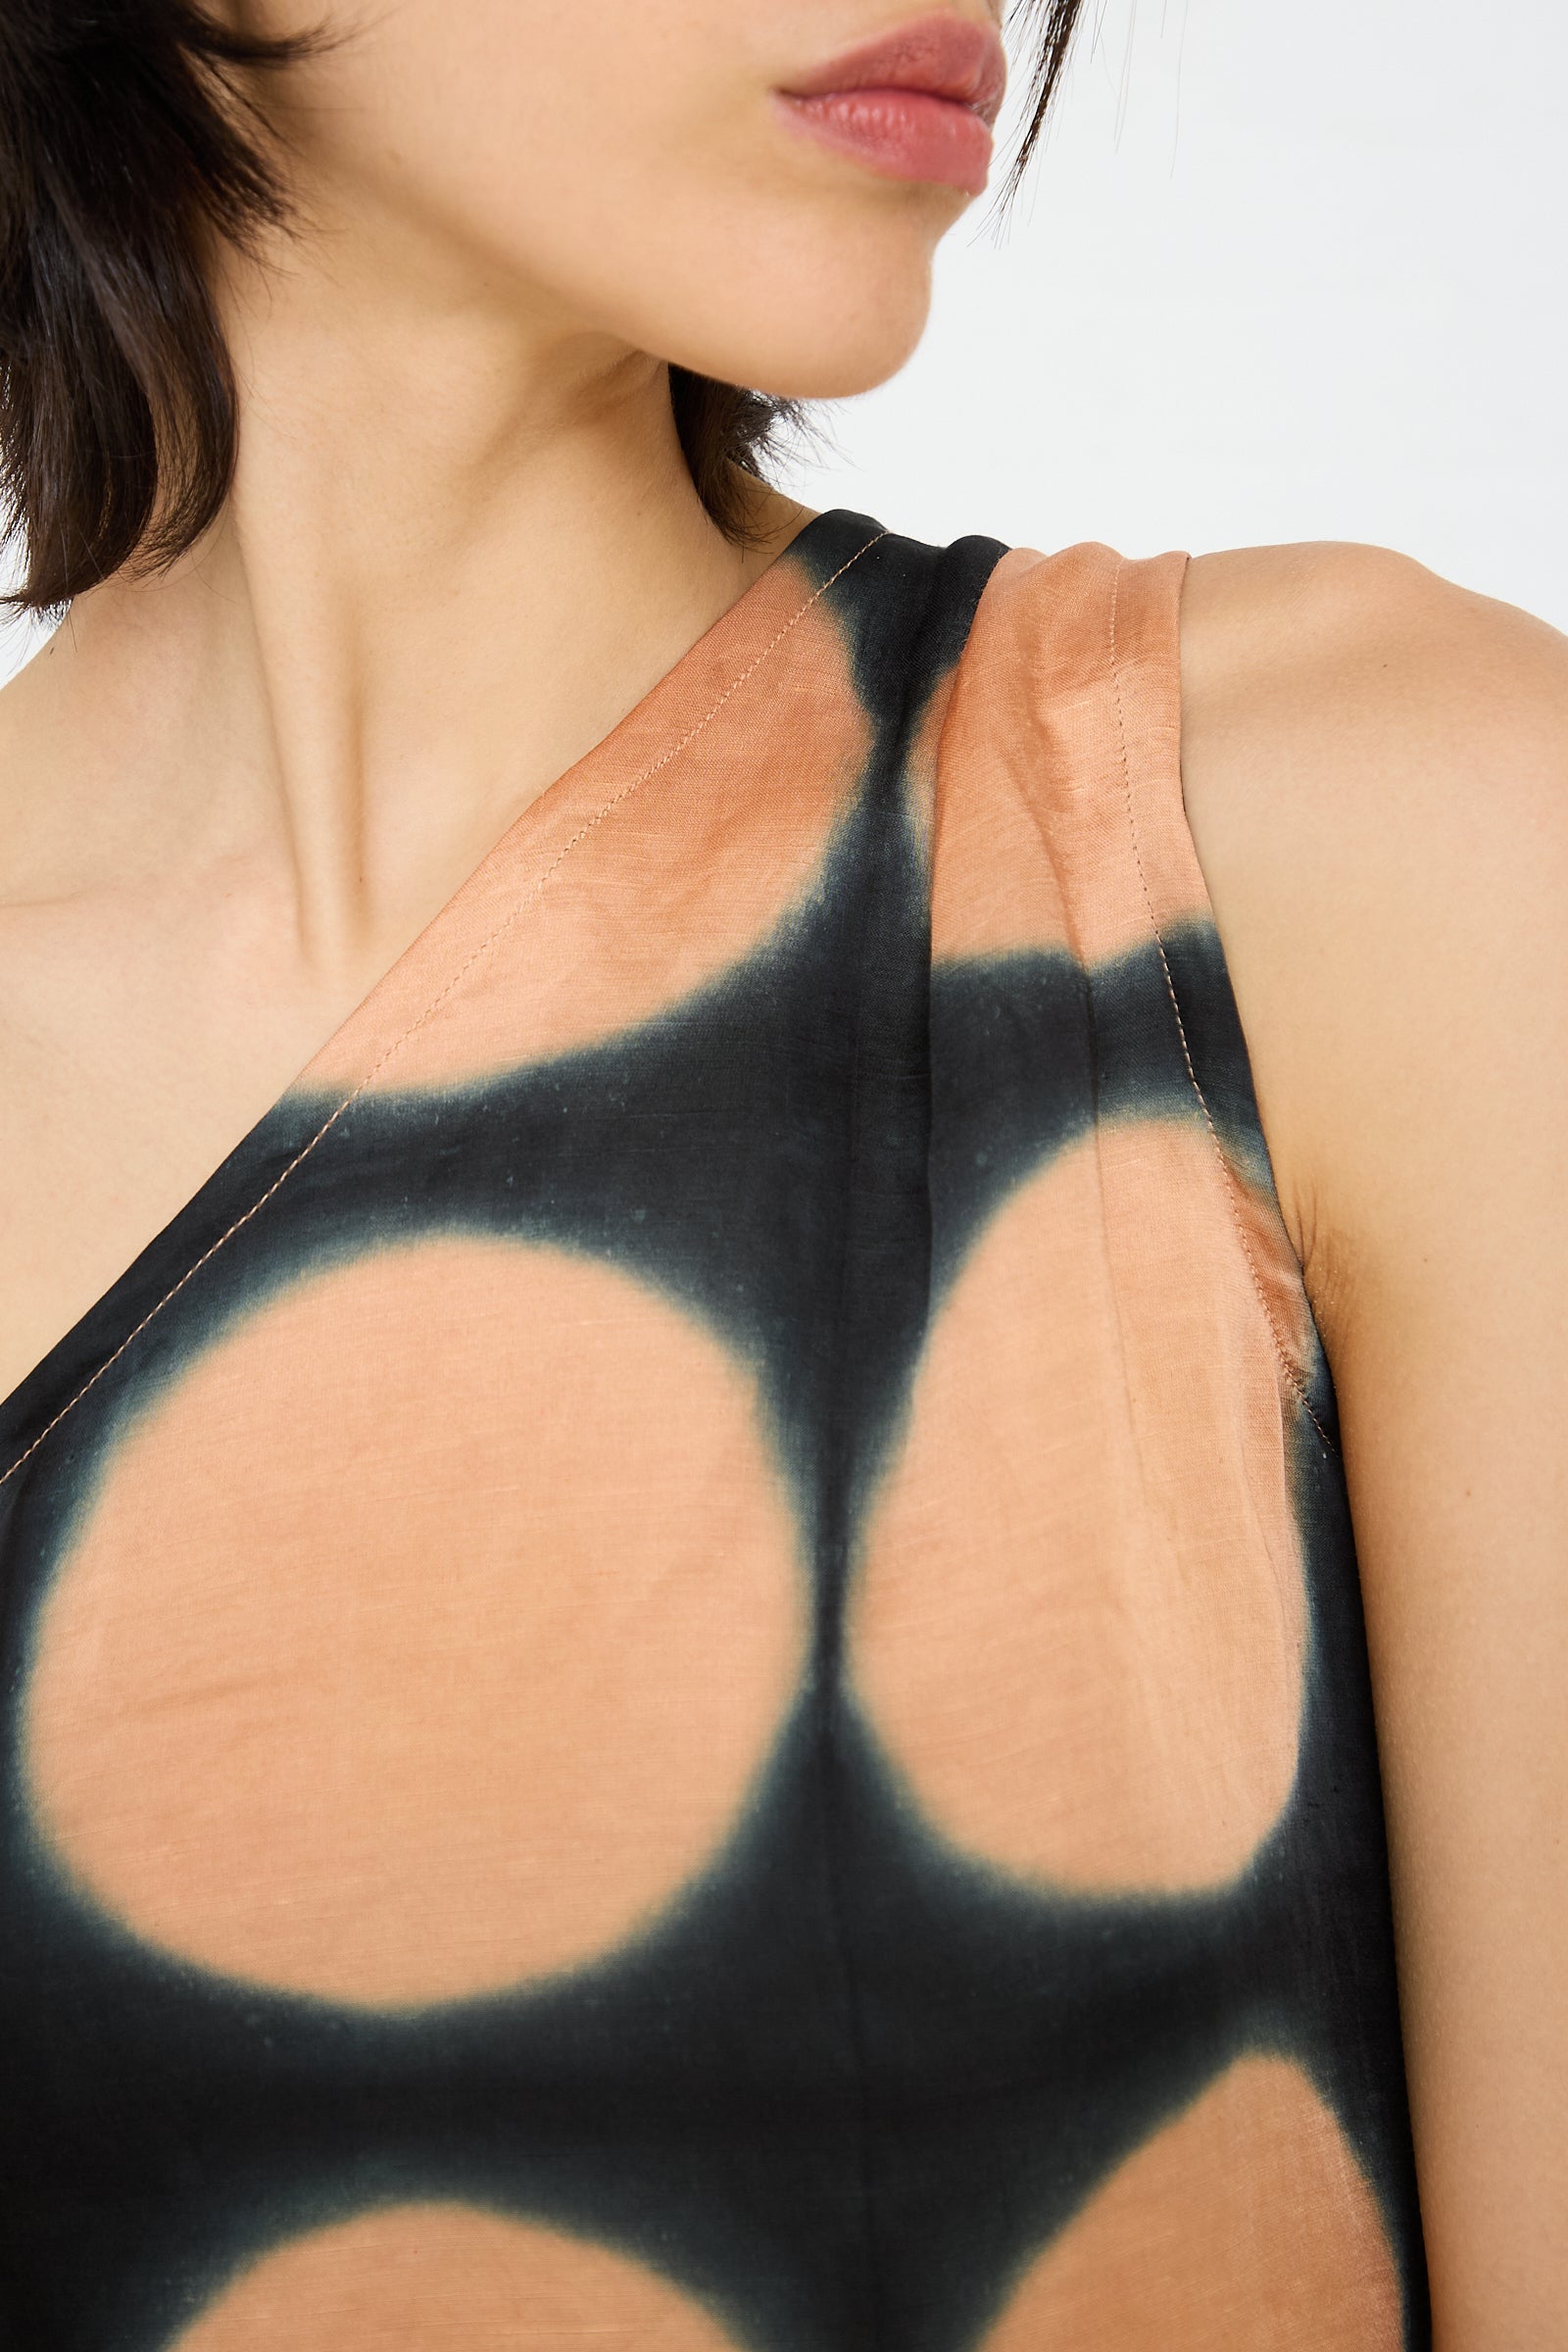 Close-up of a person wearing the TIGRA TIGRA One Shoulder Mini Dot Dress. The fabric features a hand-dyed tie-dye design in black and peach. The person's face is partially visible, looking away from the camera.